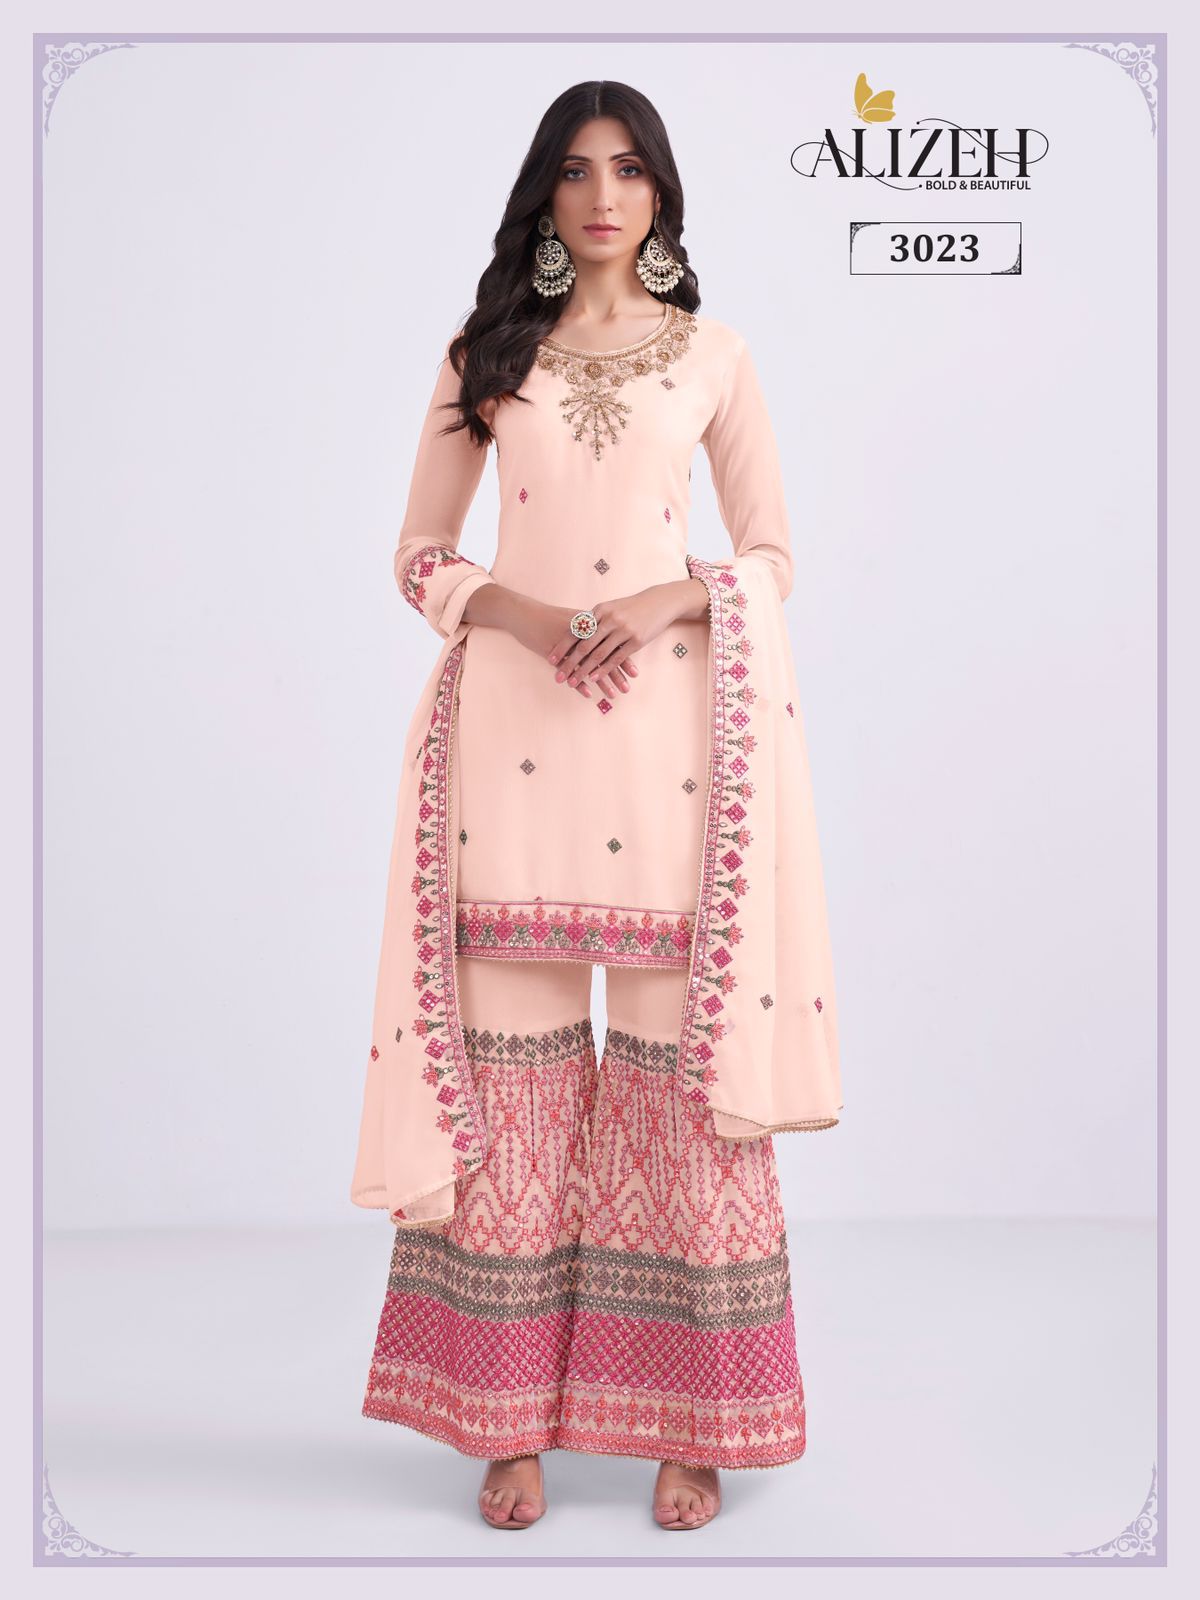 Alizeh Almora 3025 - Georgette With Embroidery Party Wear Dress